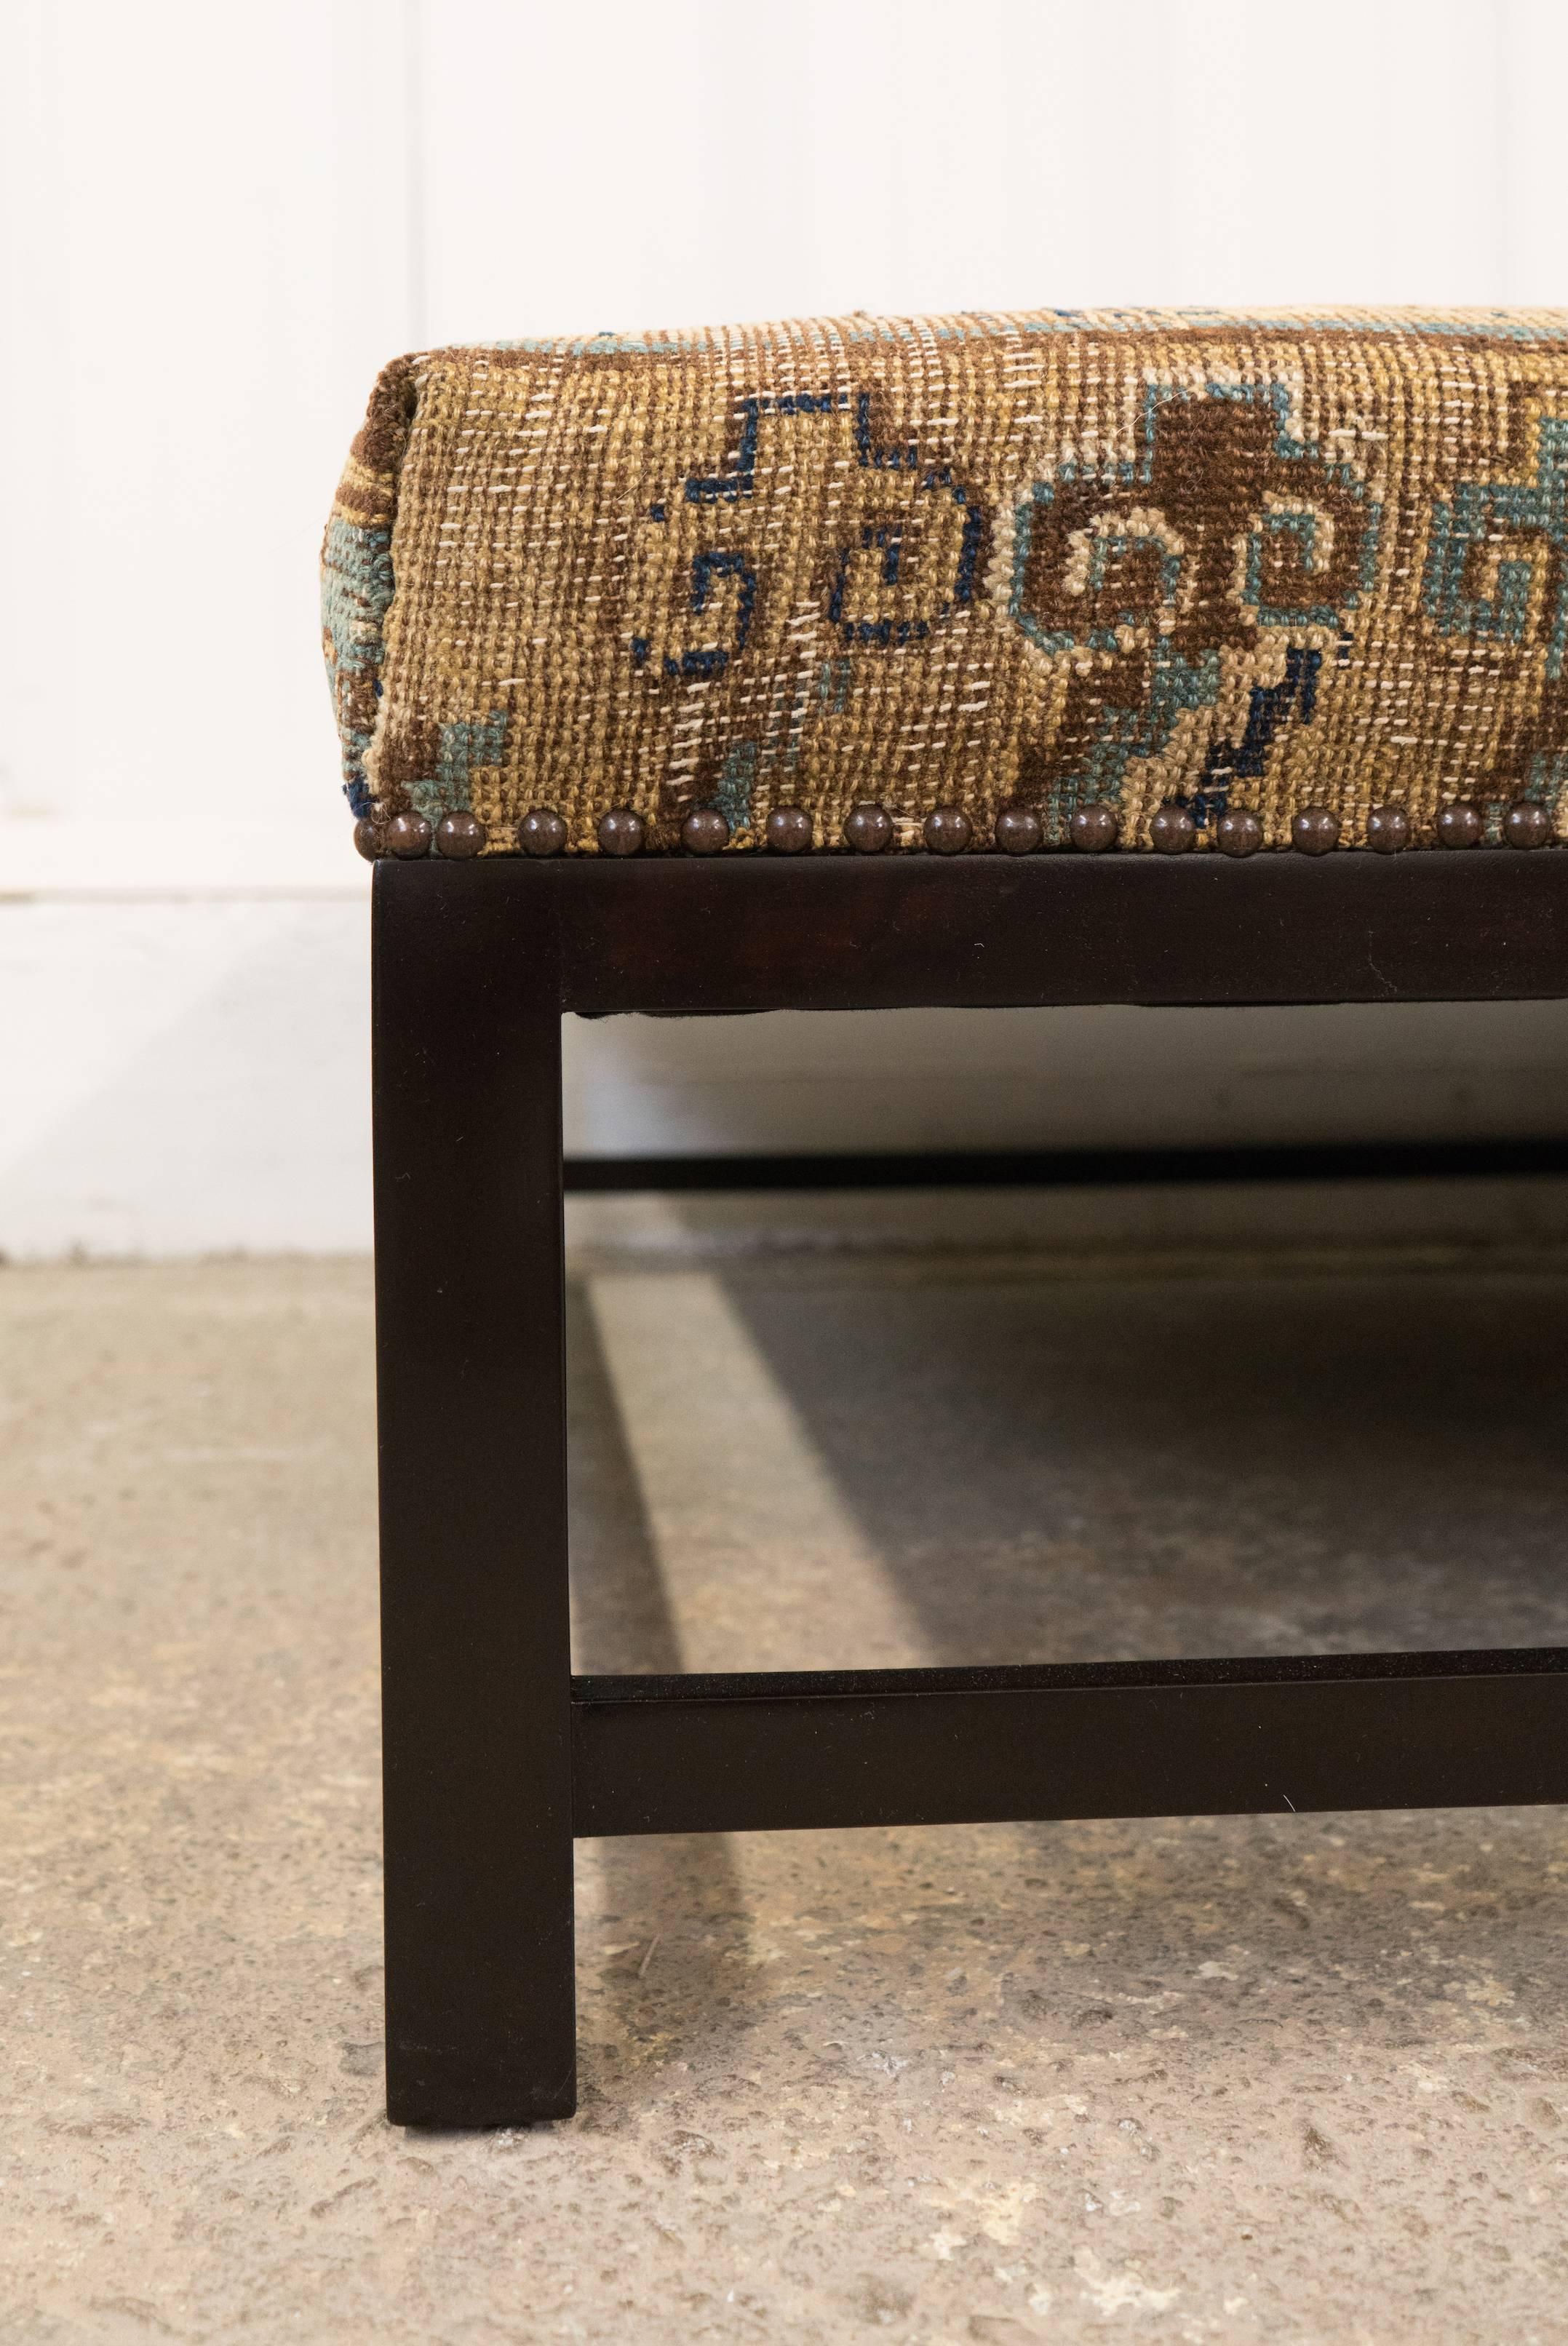 Woven Hand-Crafted Lexington Ottoman Upholstered with Vintage Rug